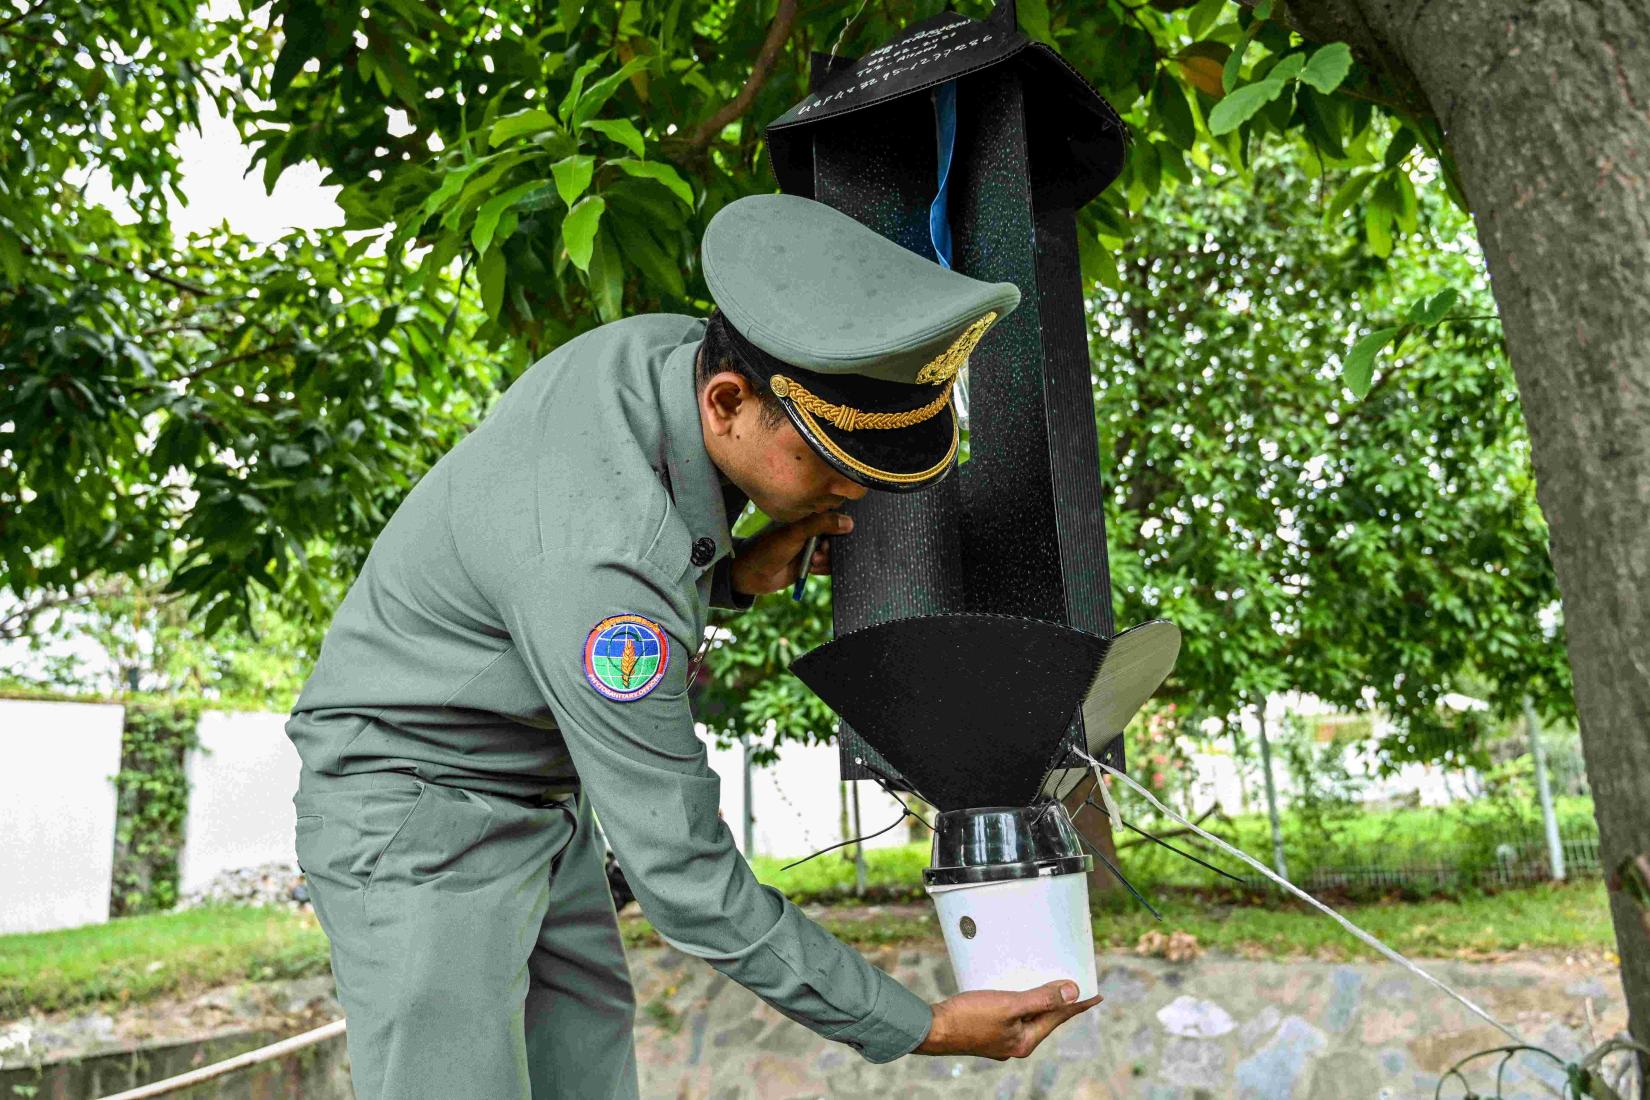 A research team in Cambodia returned to Phnom Penh International Airport to collect insects from traps erected for 2 weeks in the area.